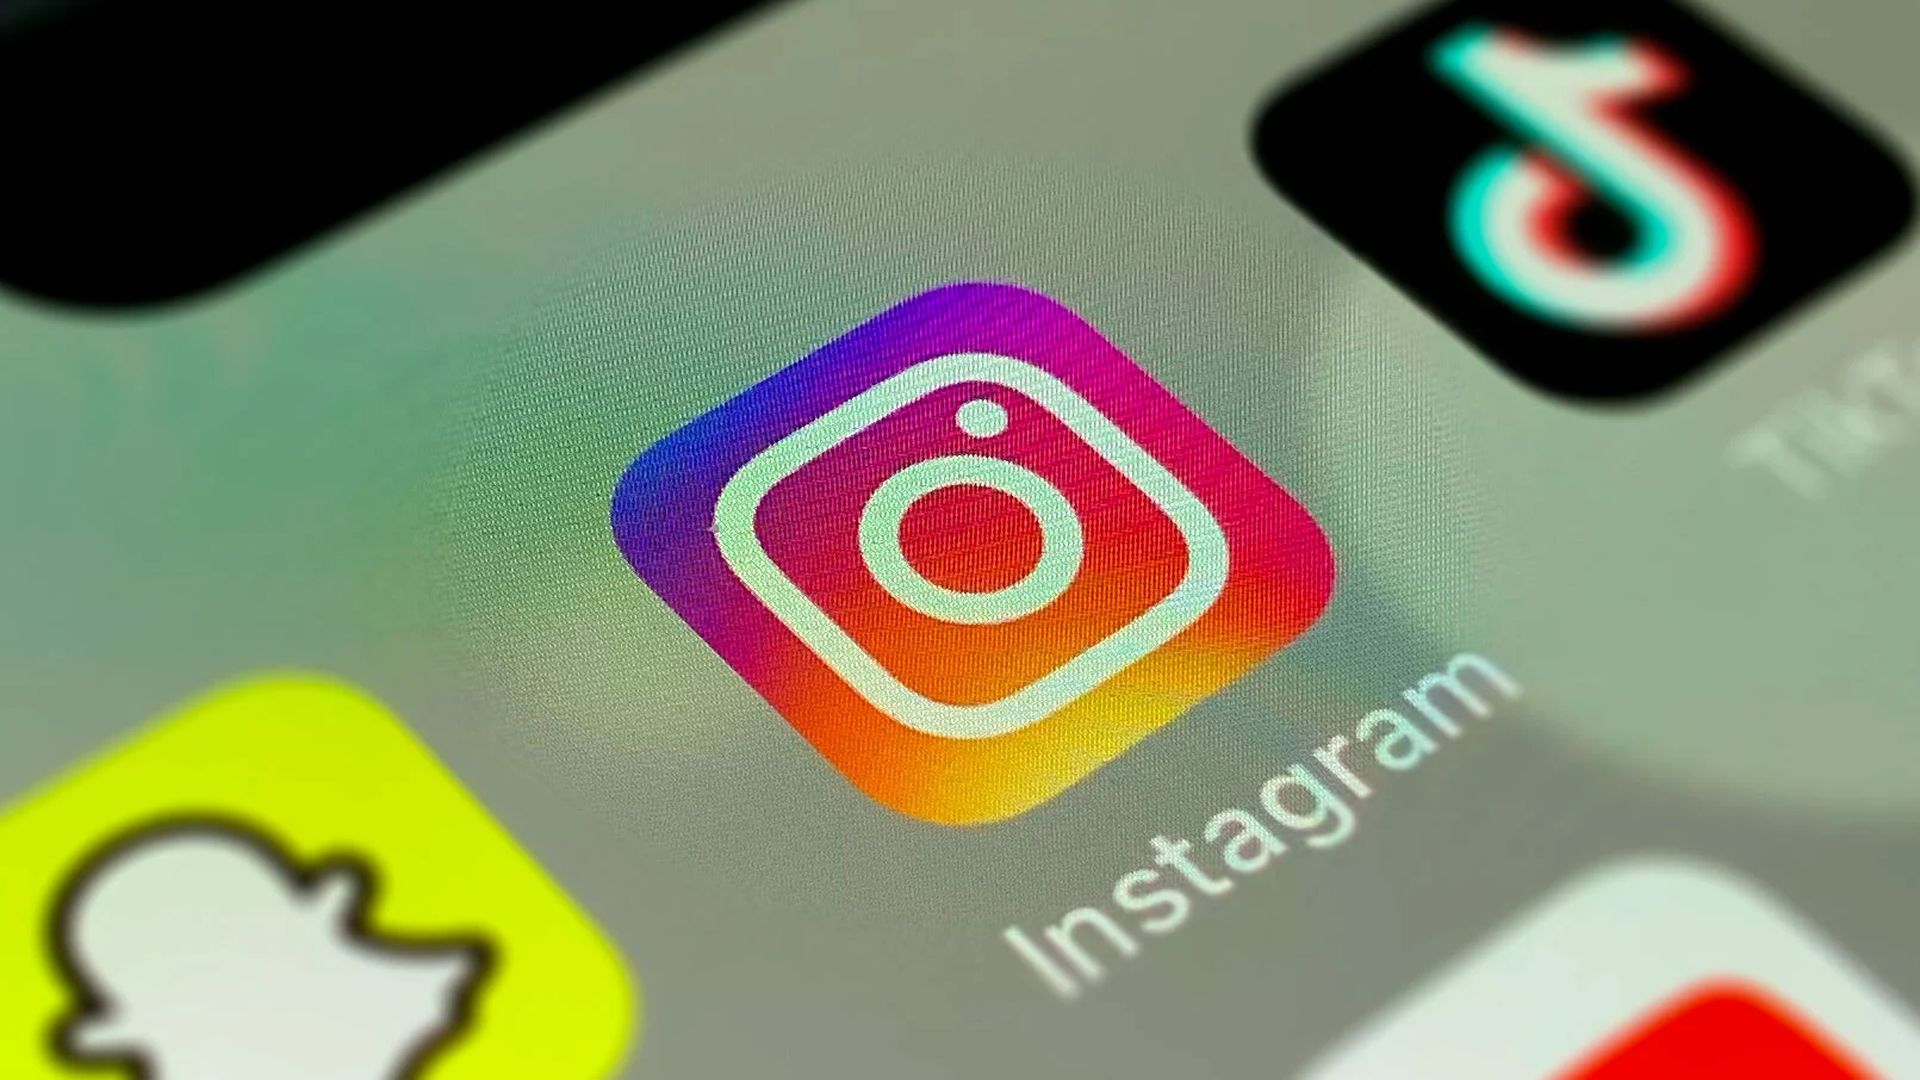 Today we explain what does Instagram user means? You might notice a former account of one of your pals that now says Instagram user if you search through...